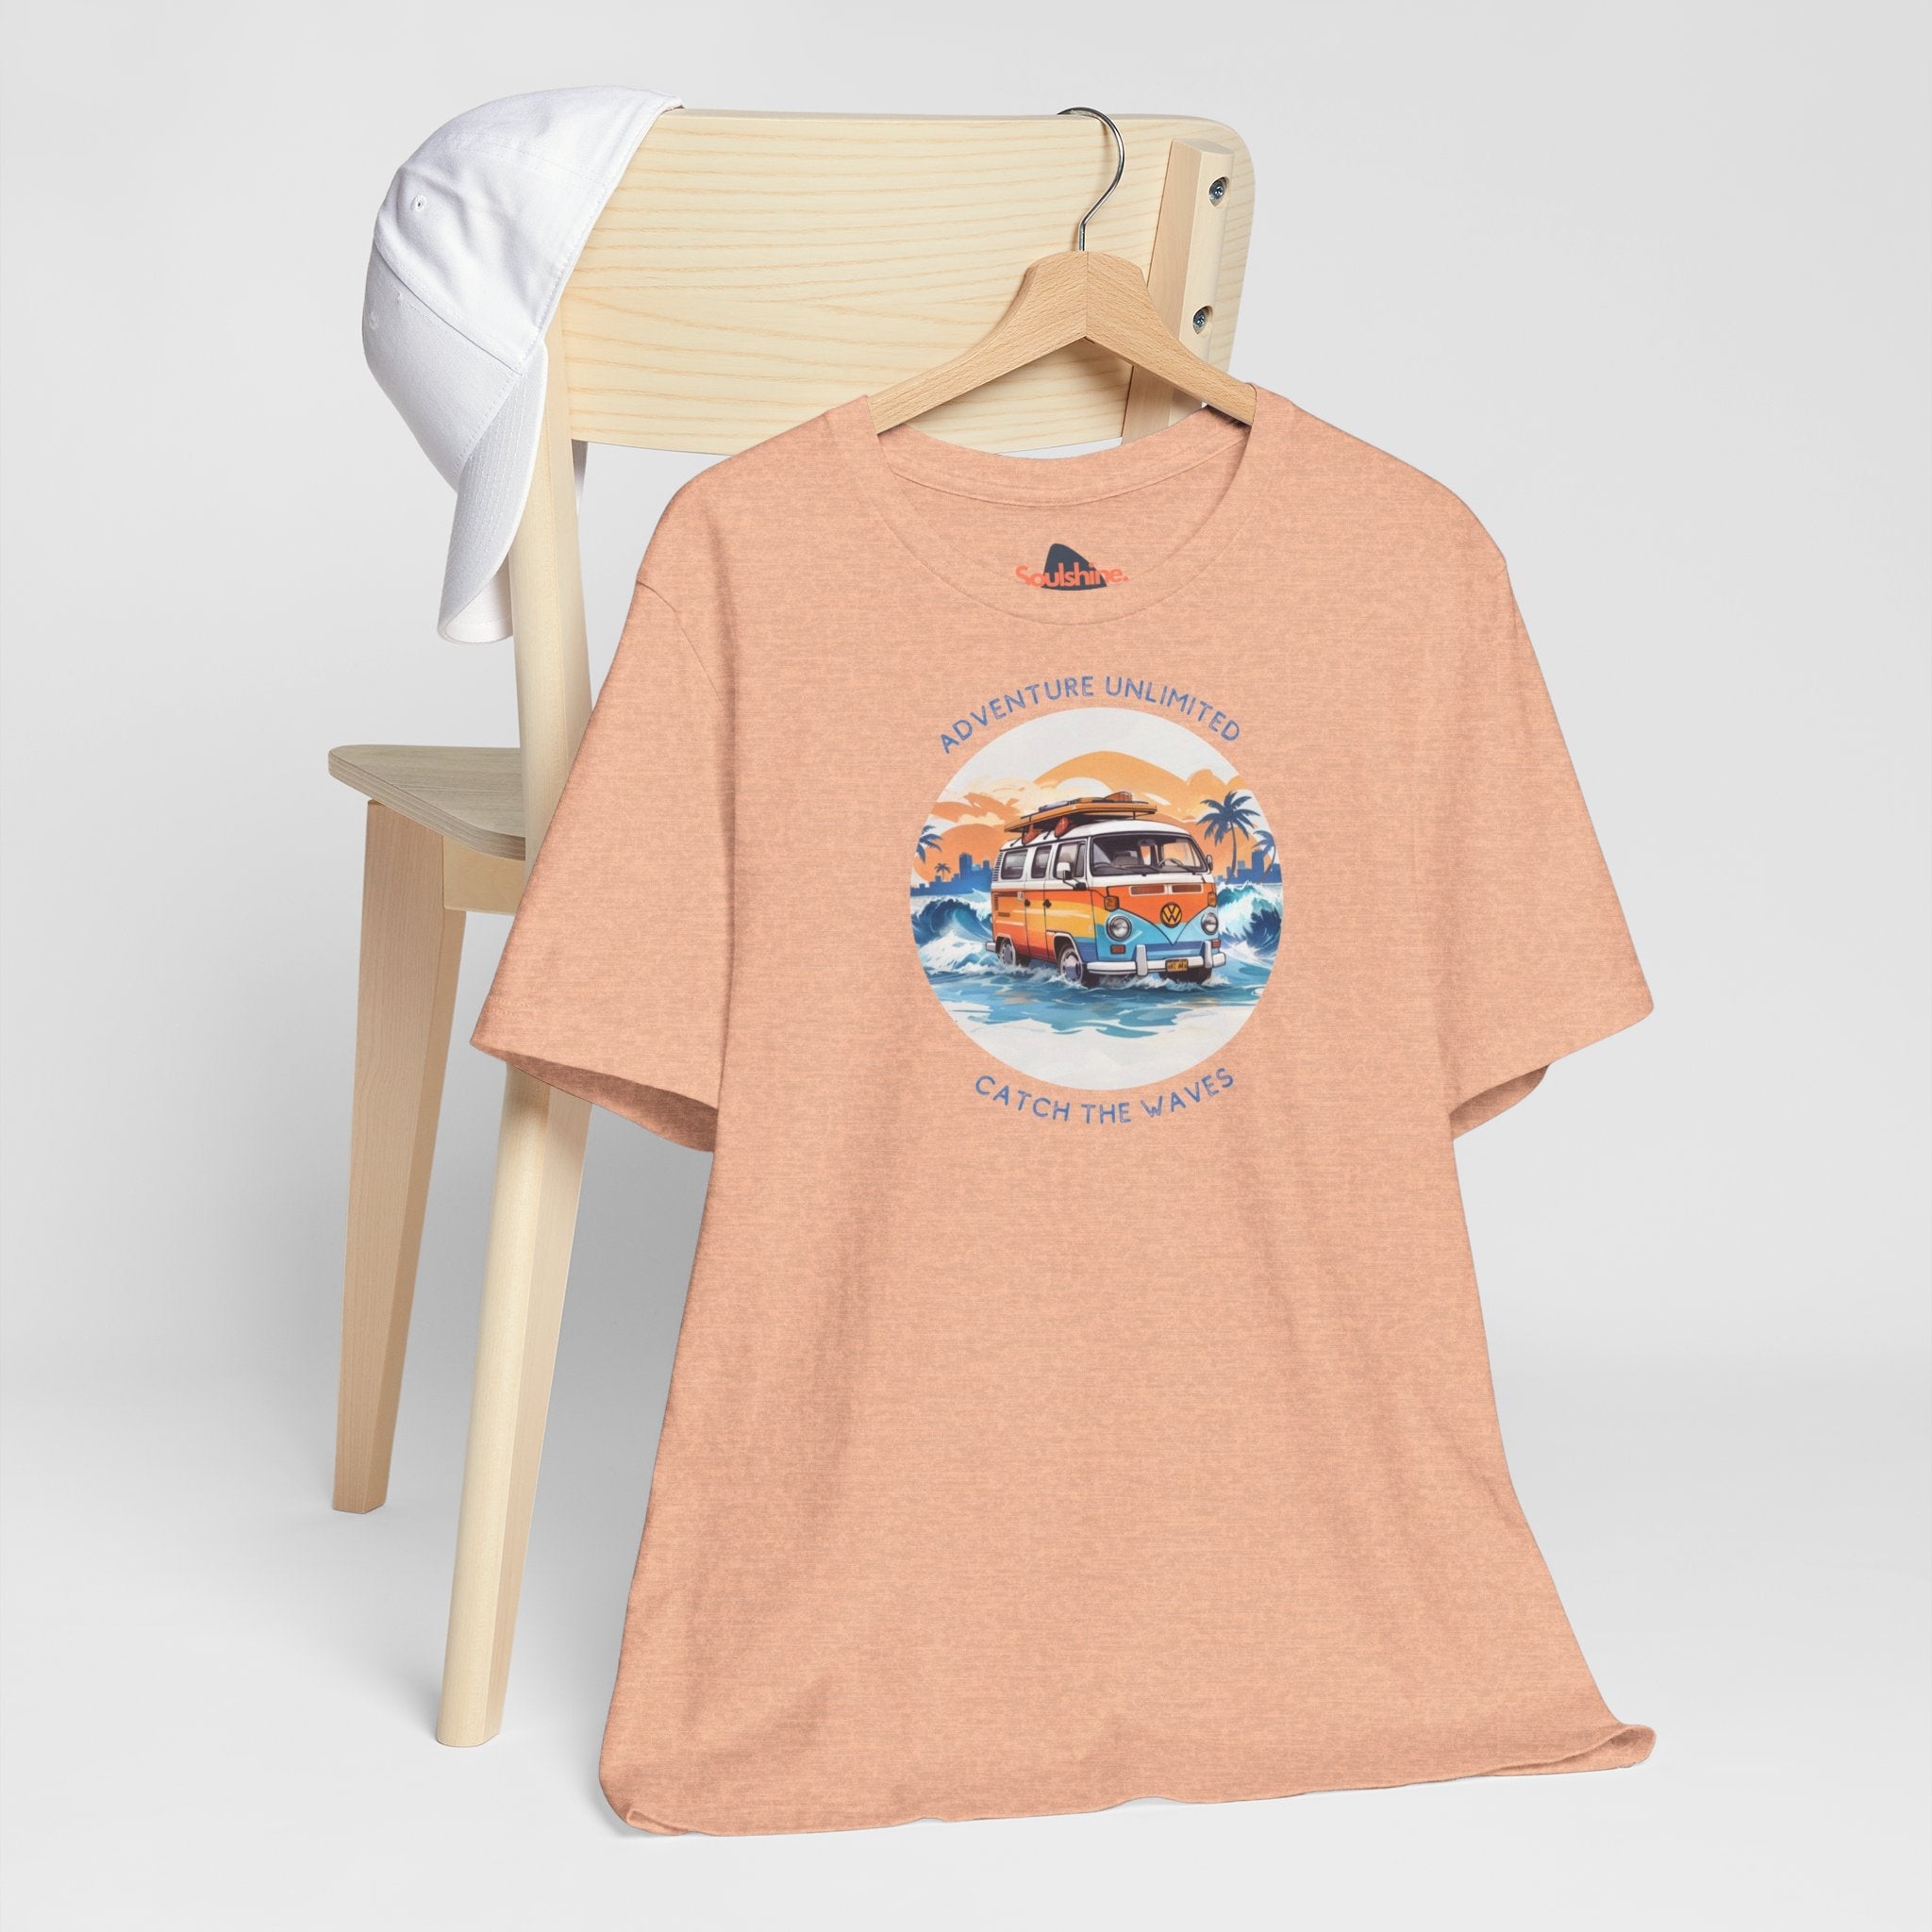 Adventure Unlimited Surfing T-Shirt with van and boat graphic printed on Bella & Canvas item